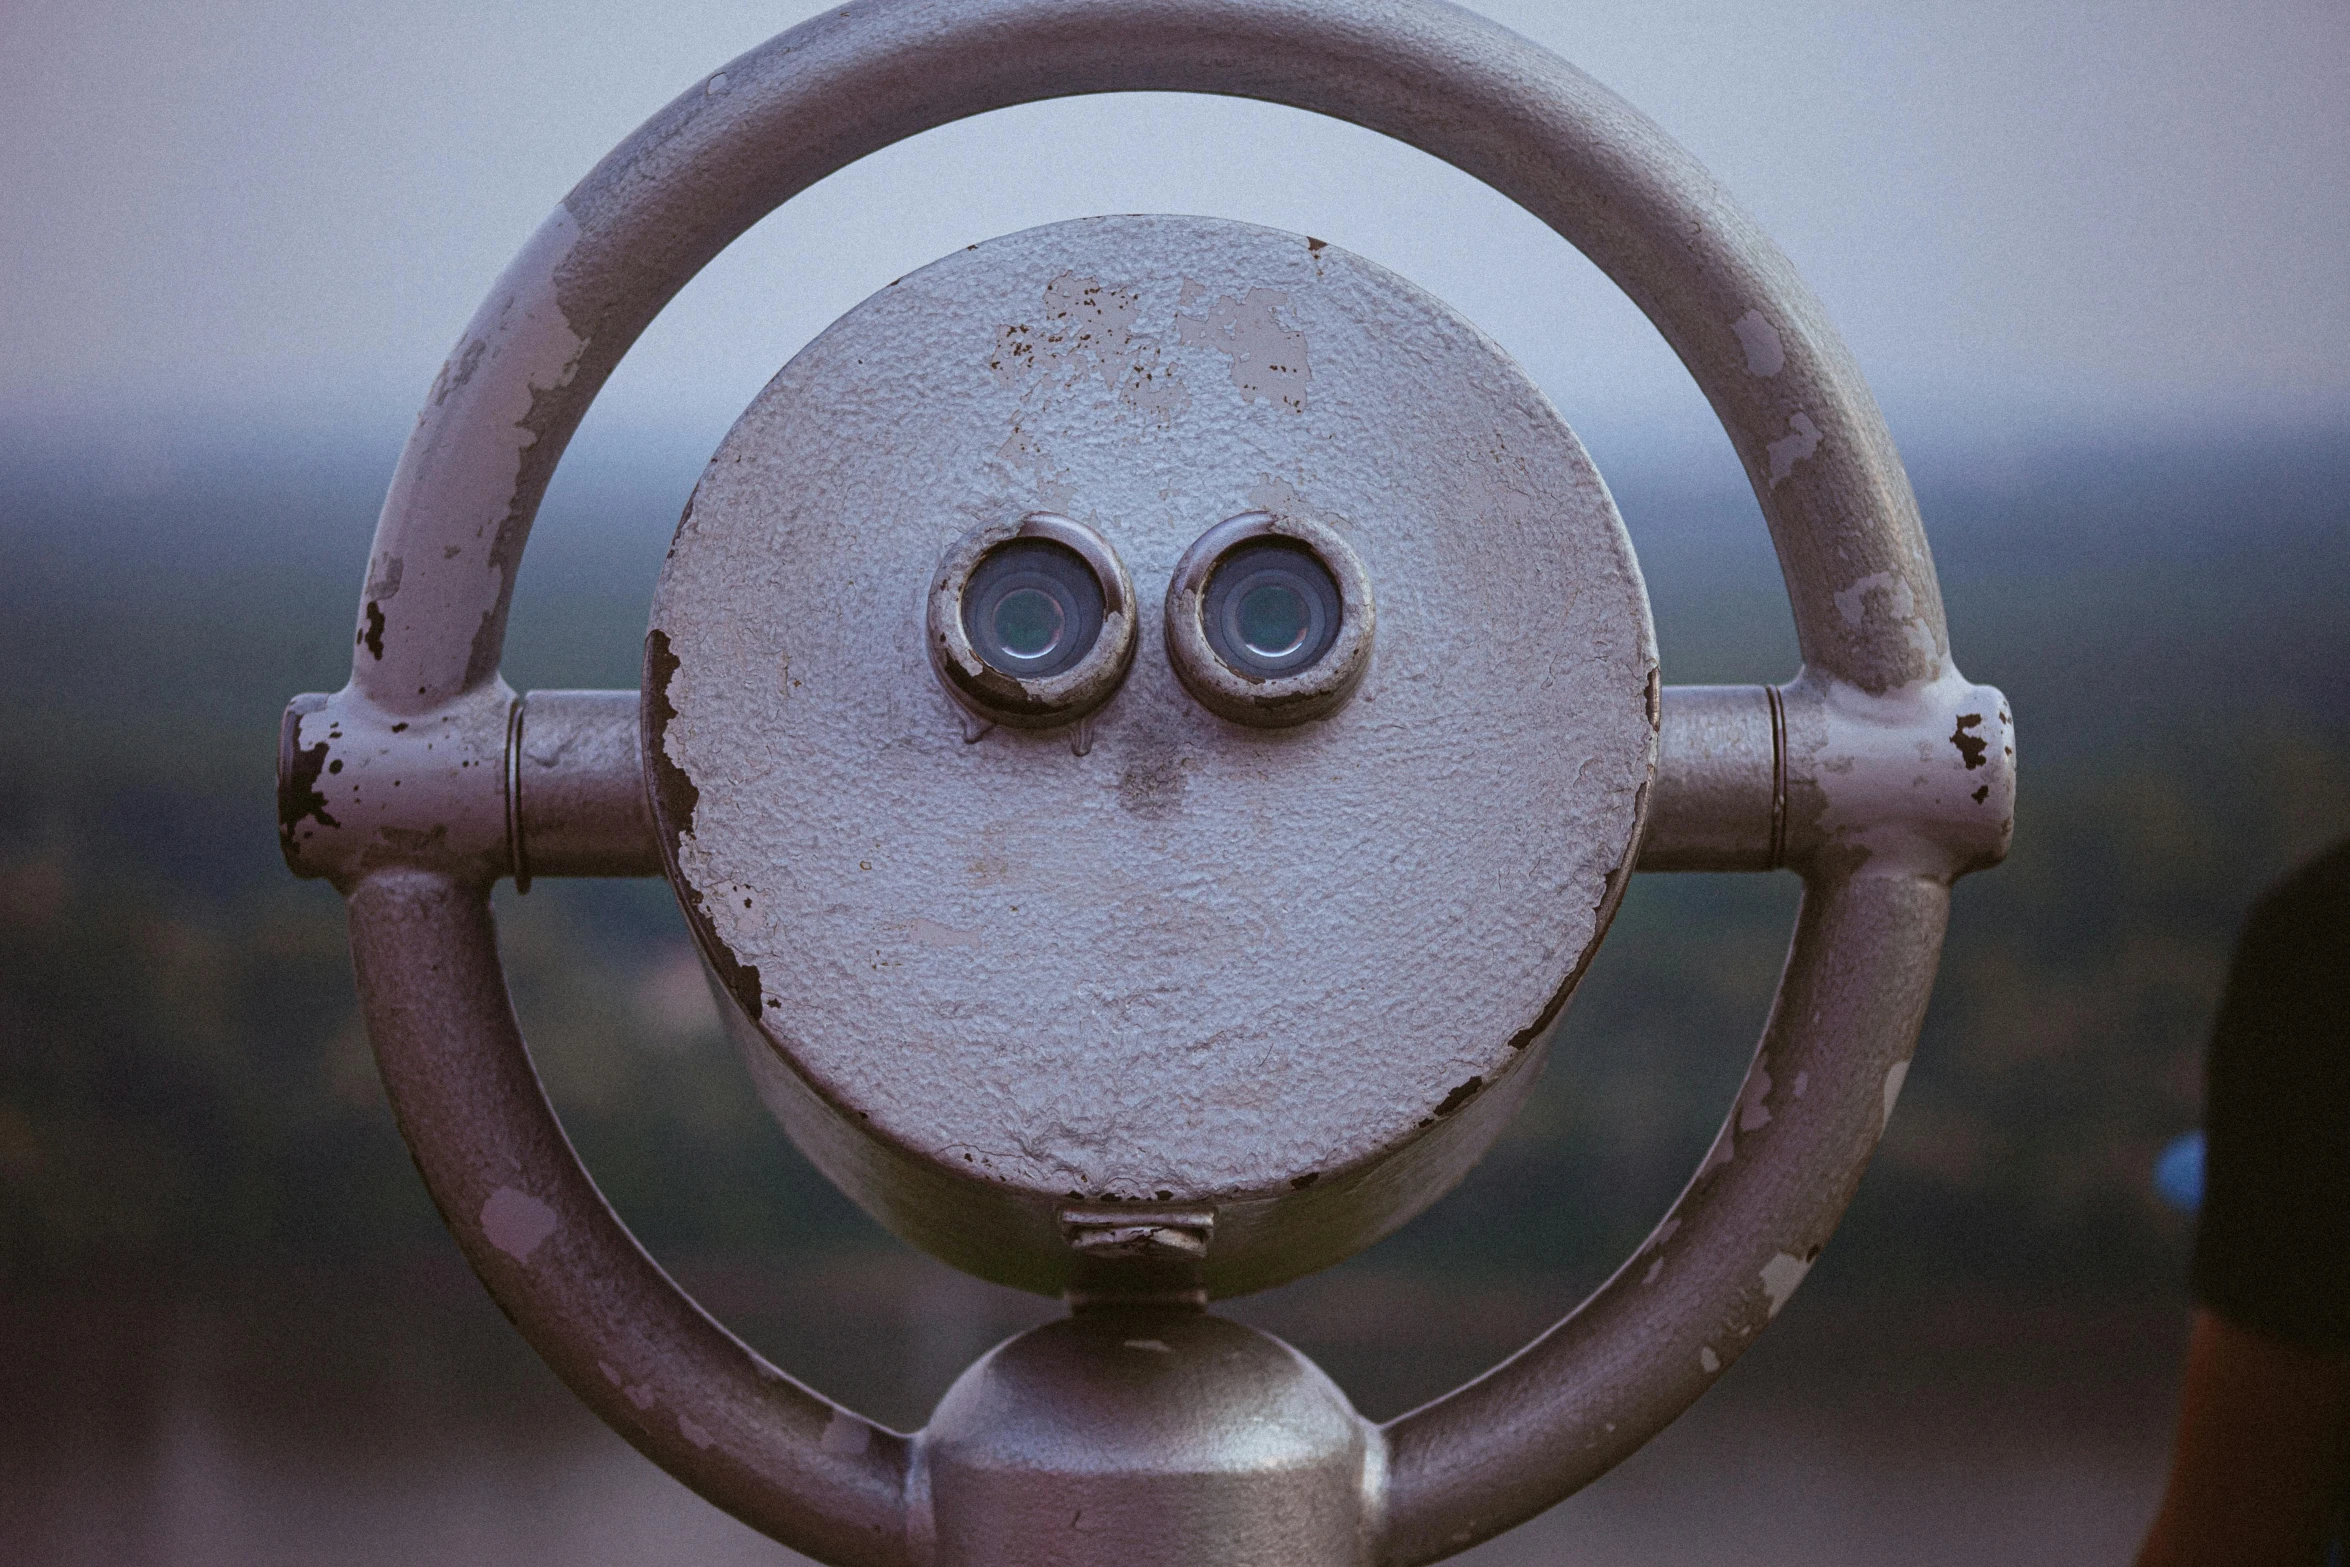 a close up view of two eyes on a circular object